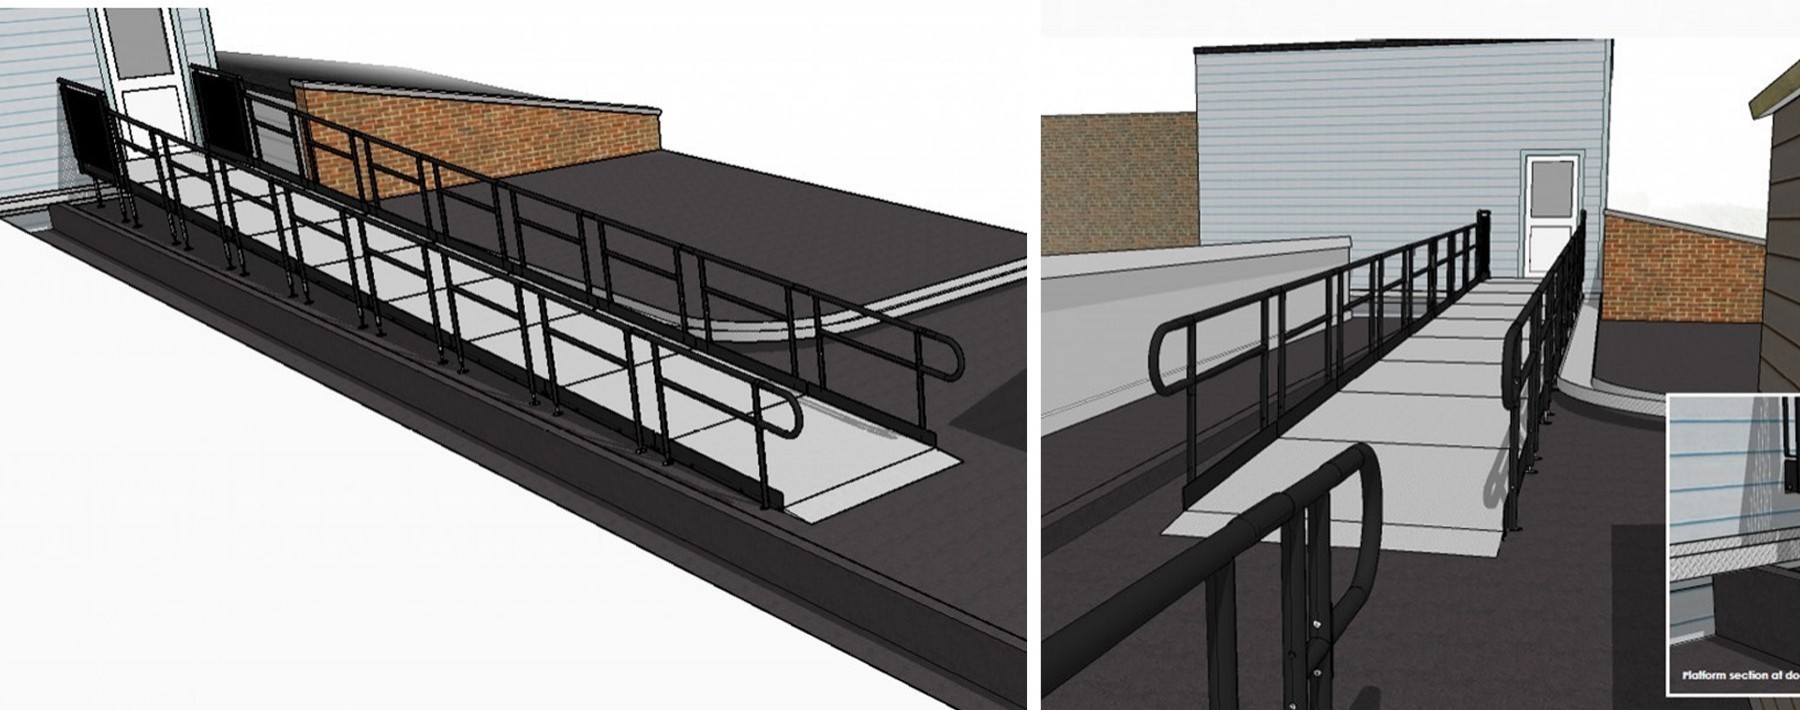 rooftop ramp drawing 